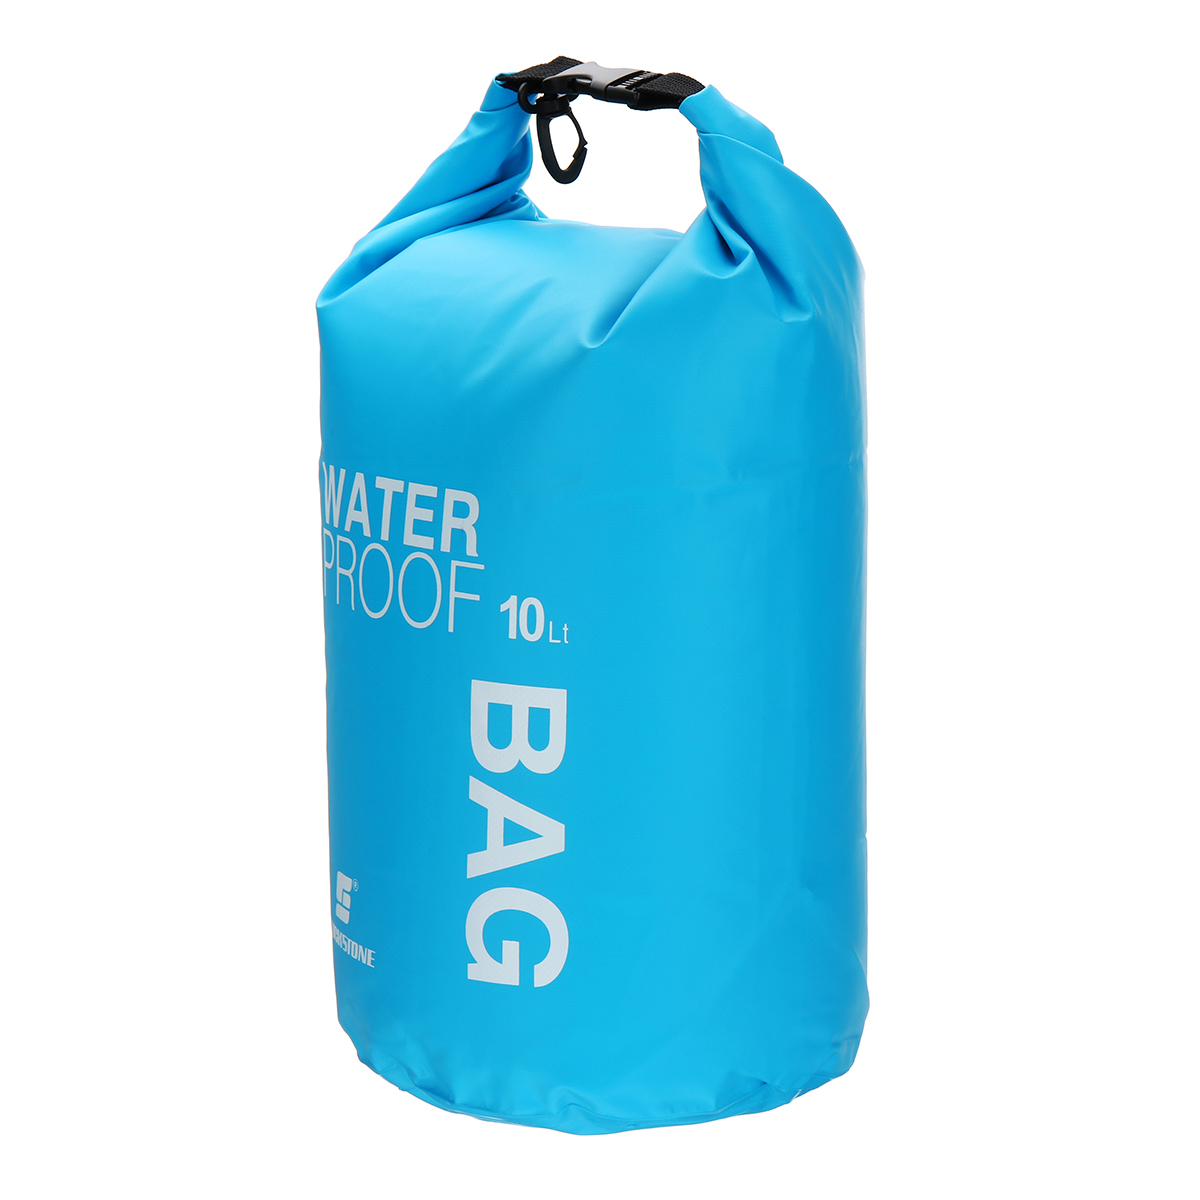 10L-Outdoor-Swimming-Air-Inflation-Floating-Mobile-Phone-Camera-Storage-PVC-Waterproof-Bag-1820807-5